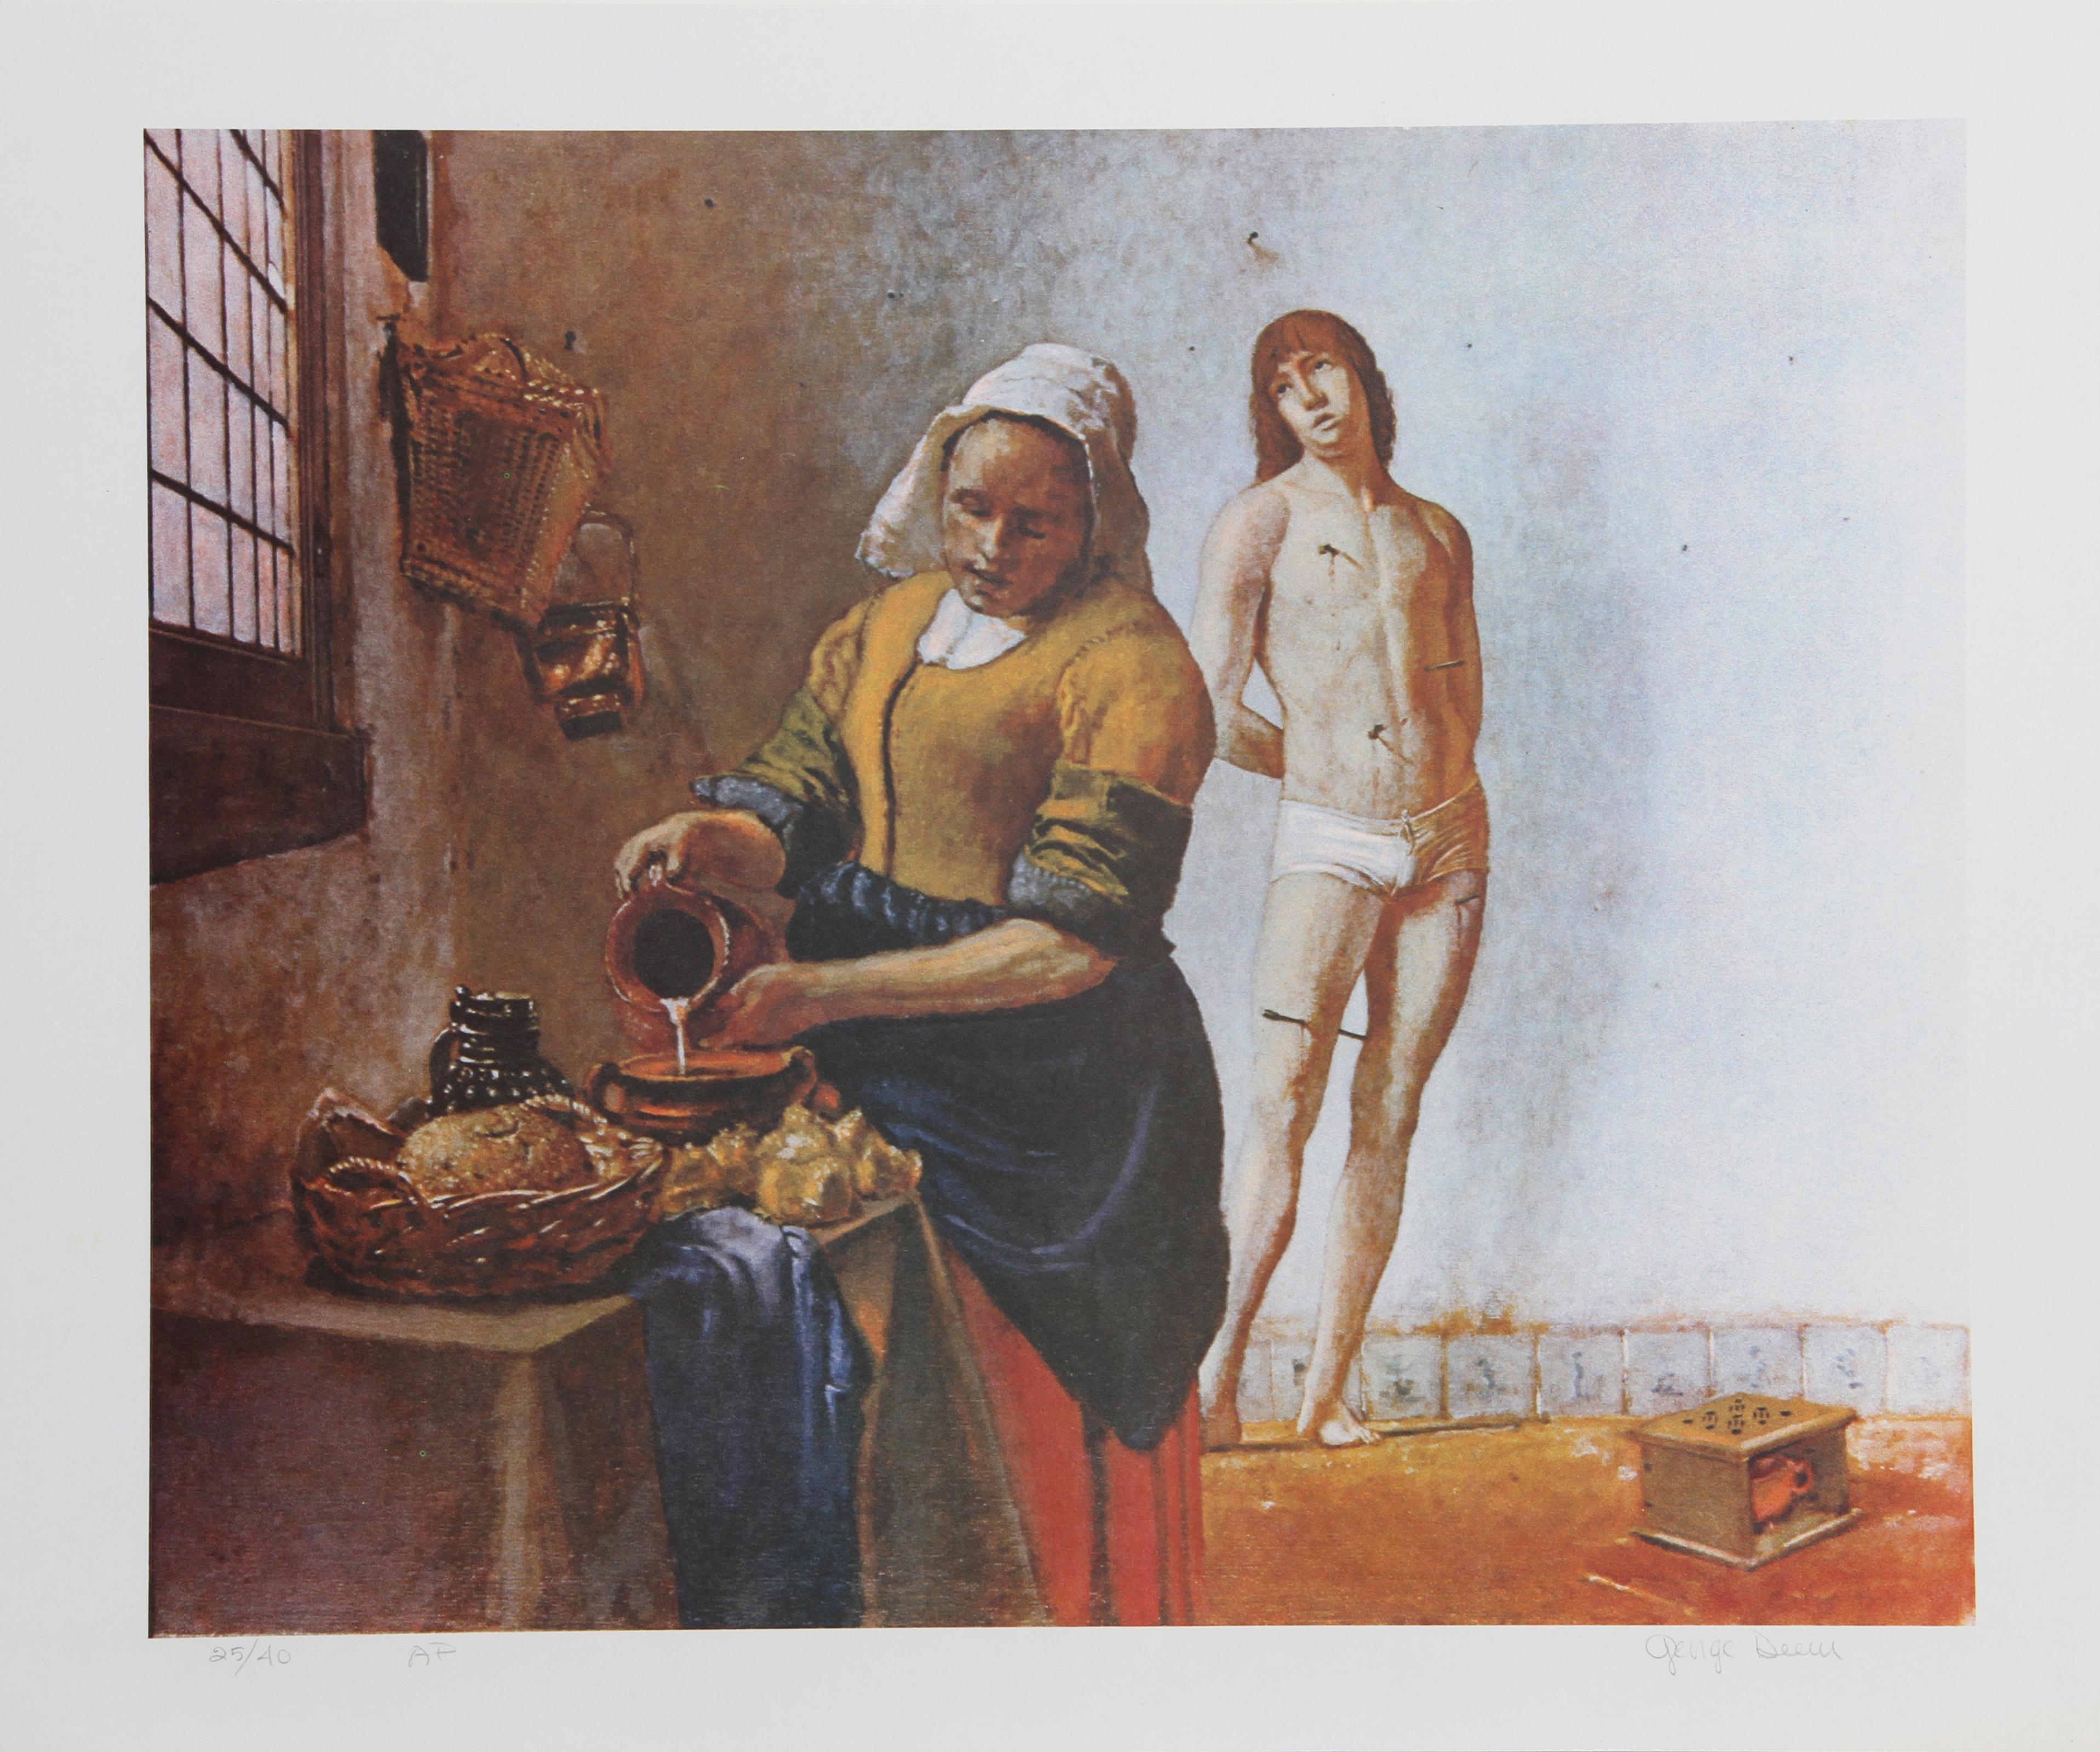 Artist: George Deem
Title: Sebastian in the Kitchen
Year: 1979
Medium: Lithograph, signed and numbered in pencil
Edition: 300, AP 40
Image Size: 19 x 23 inches 
Paper Size: 22 in. x 30 in. (55.88 cm x 76.2 cm)